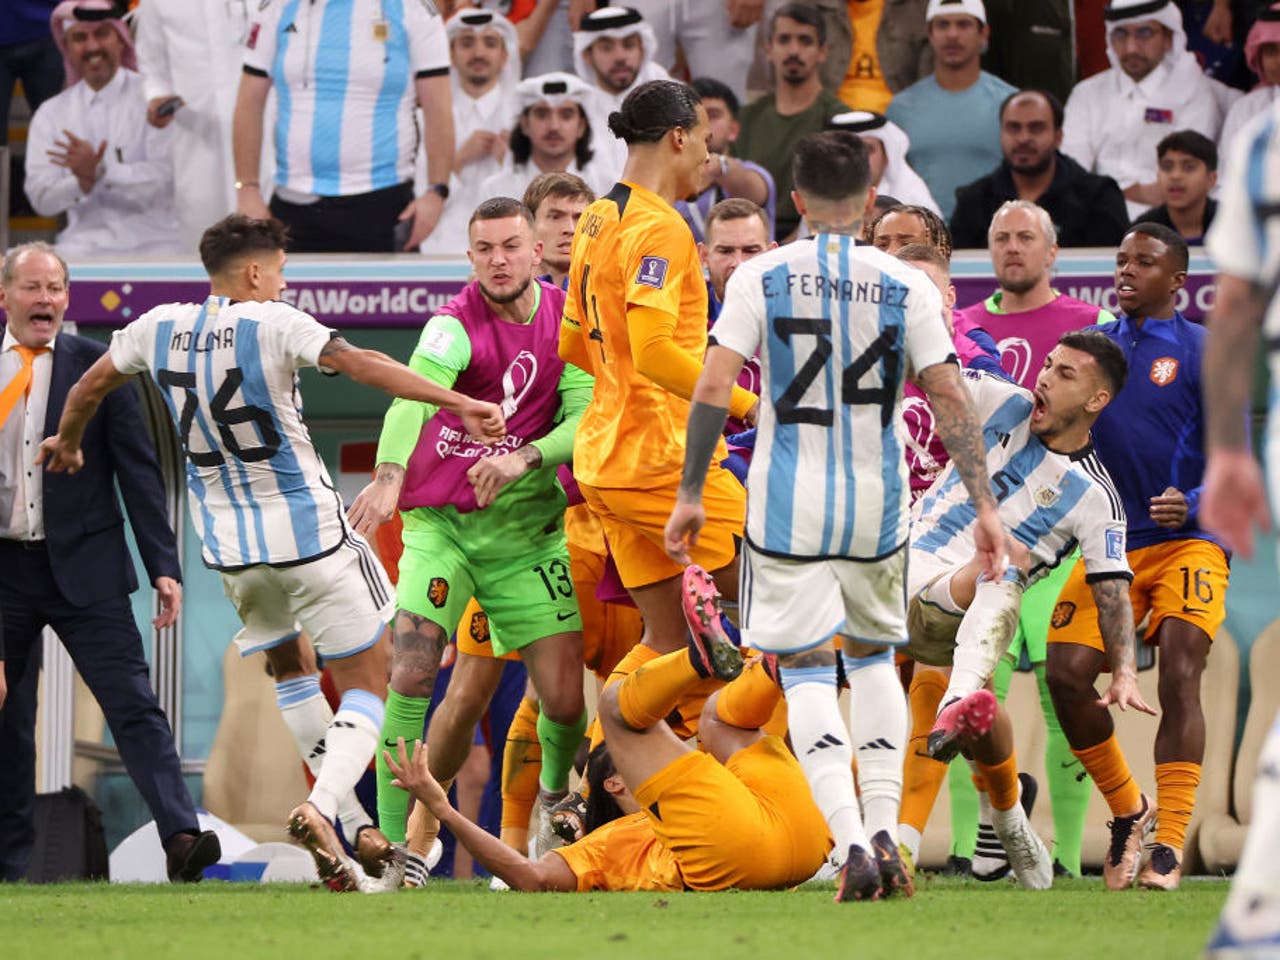 FIFA charges Argentina for disorder at World Cup match - The San